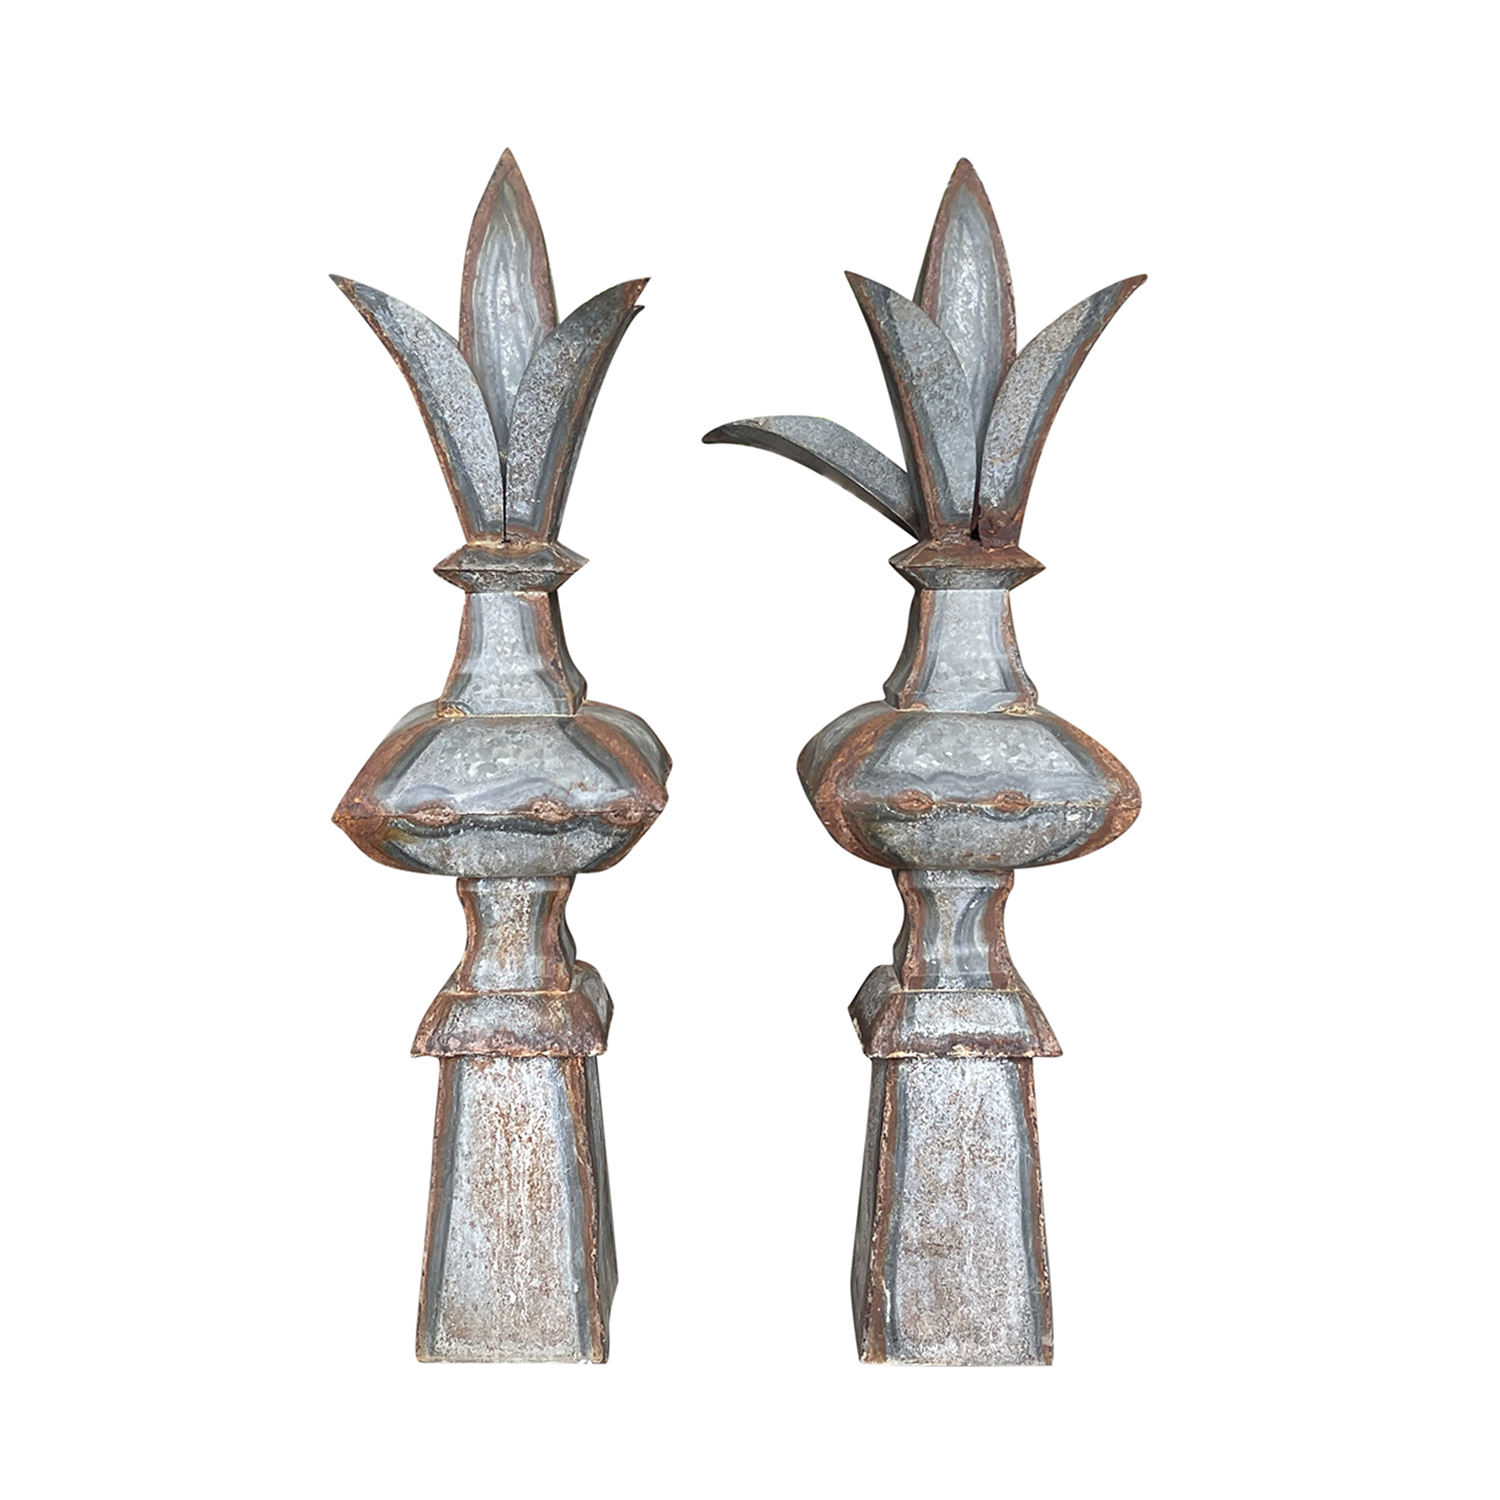 A Pair of French Roof Top Finials in Metal